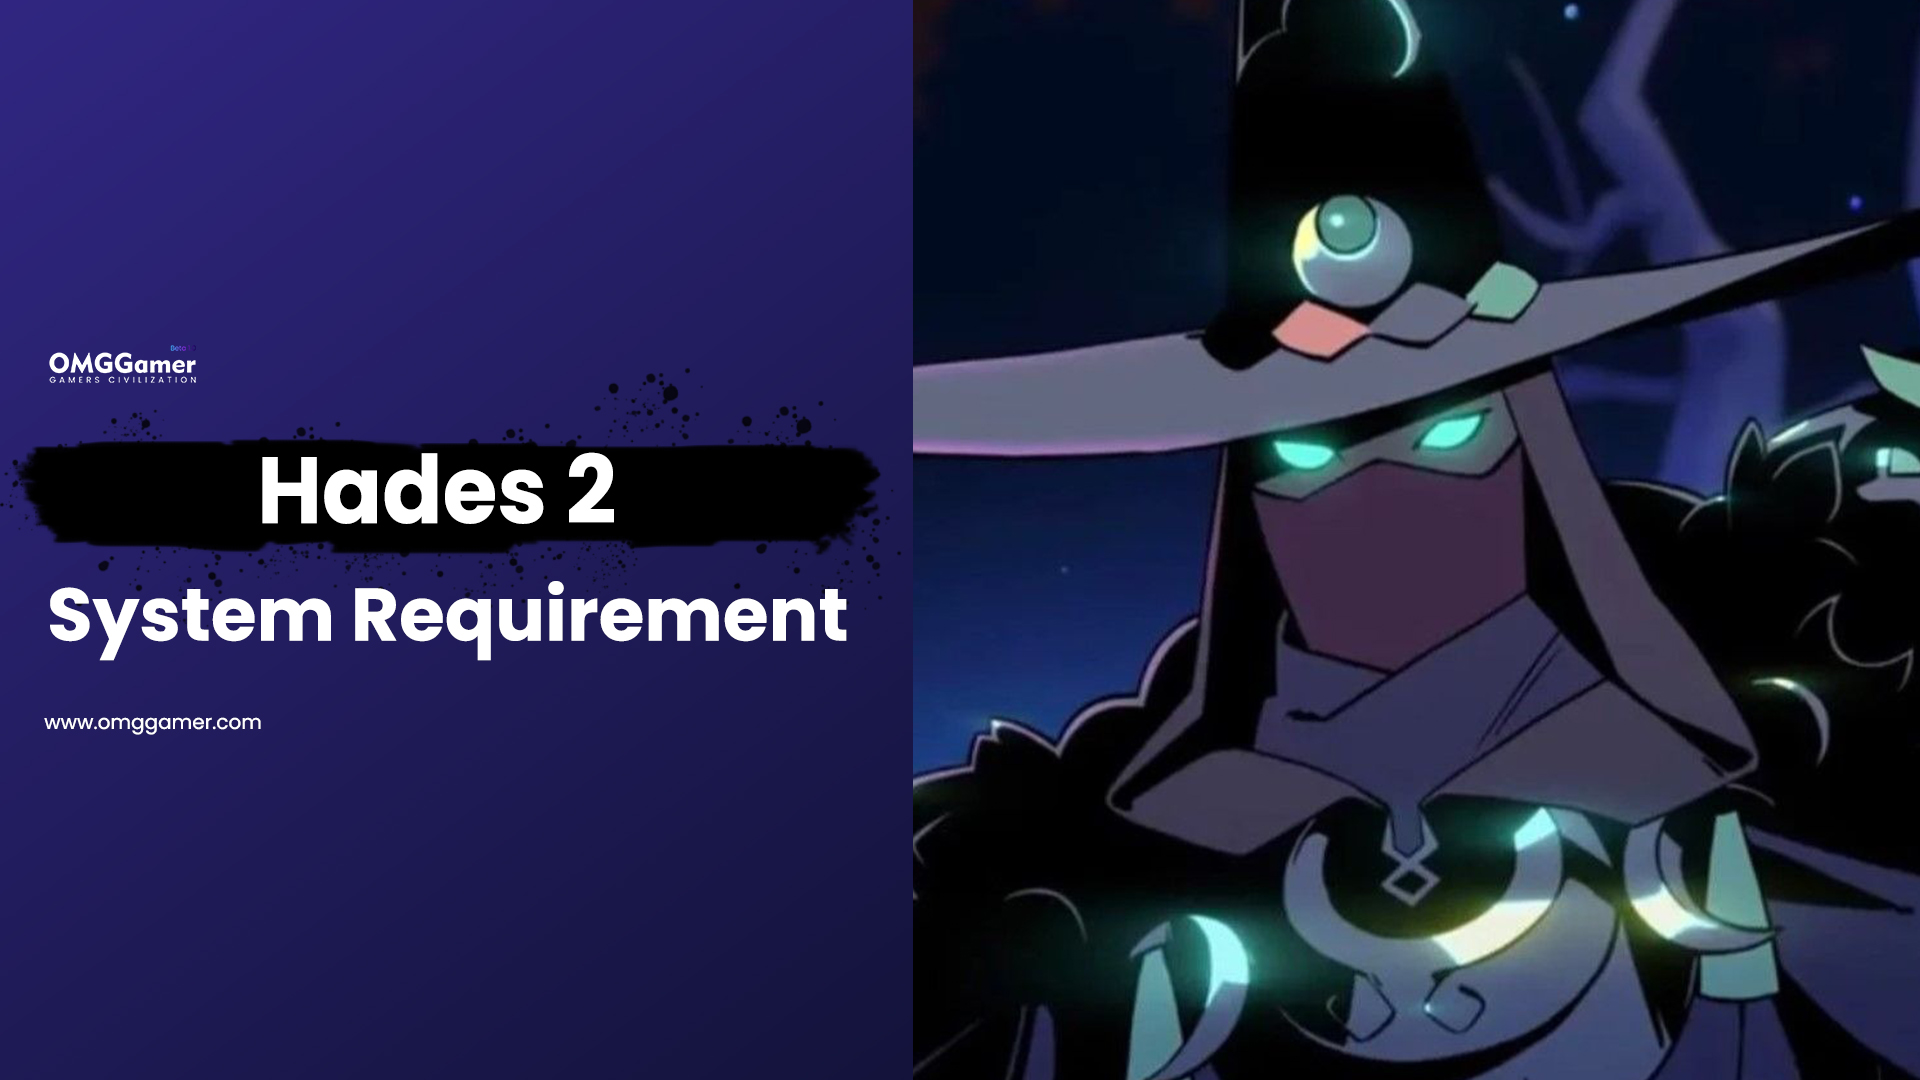 Hades 2 System Requirement